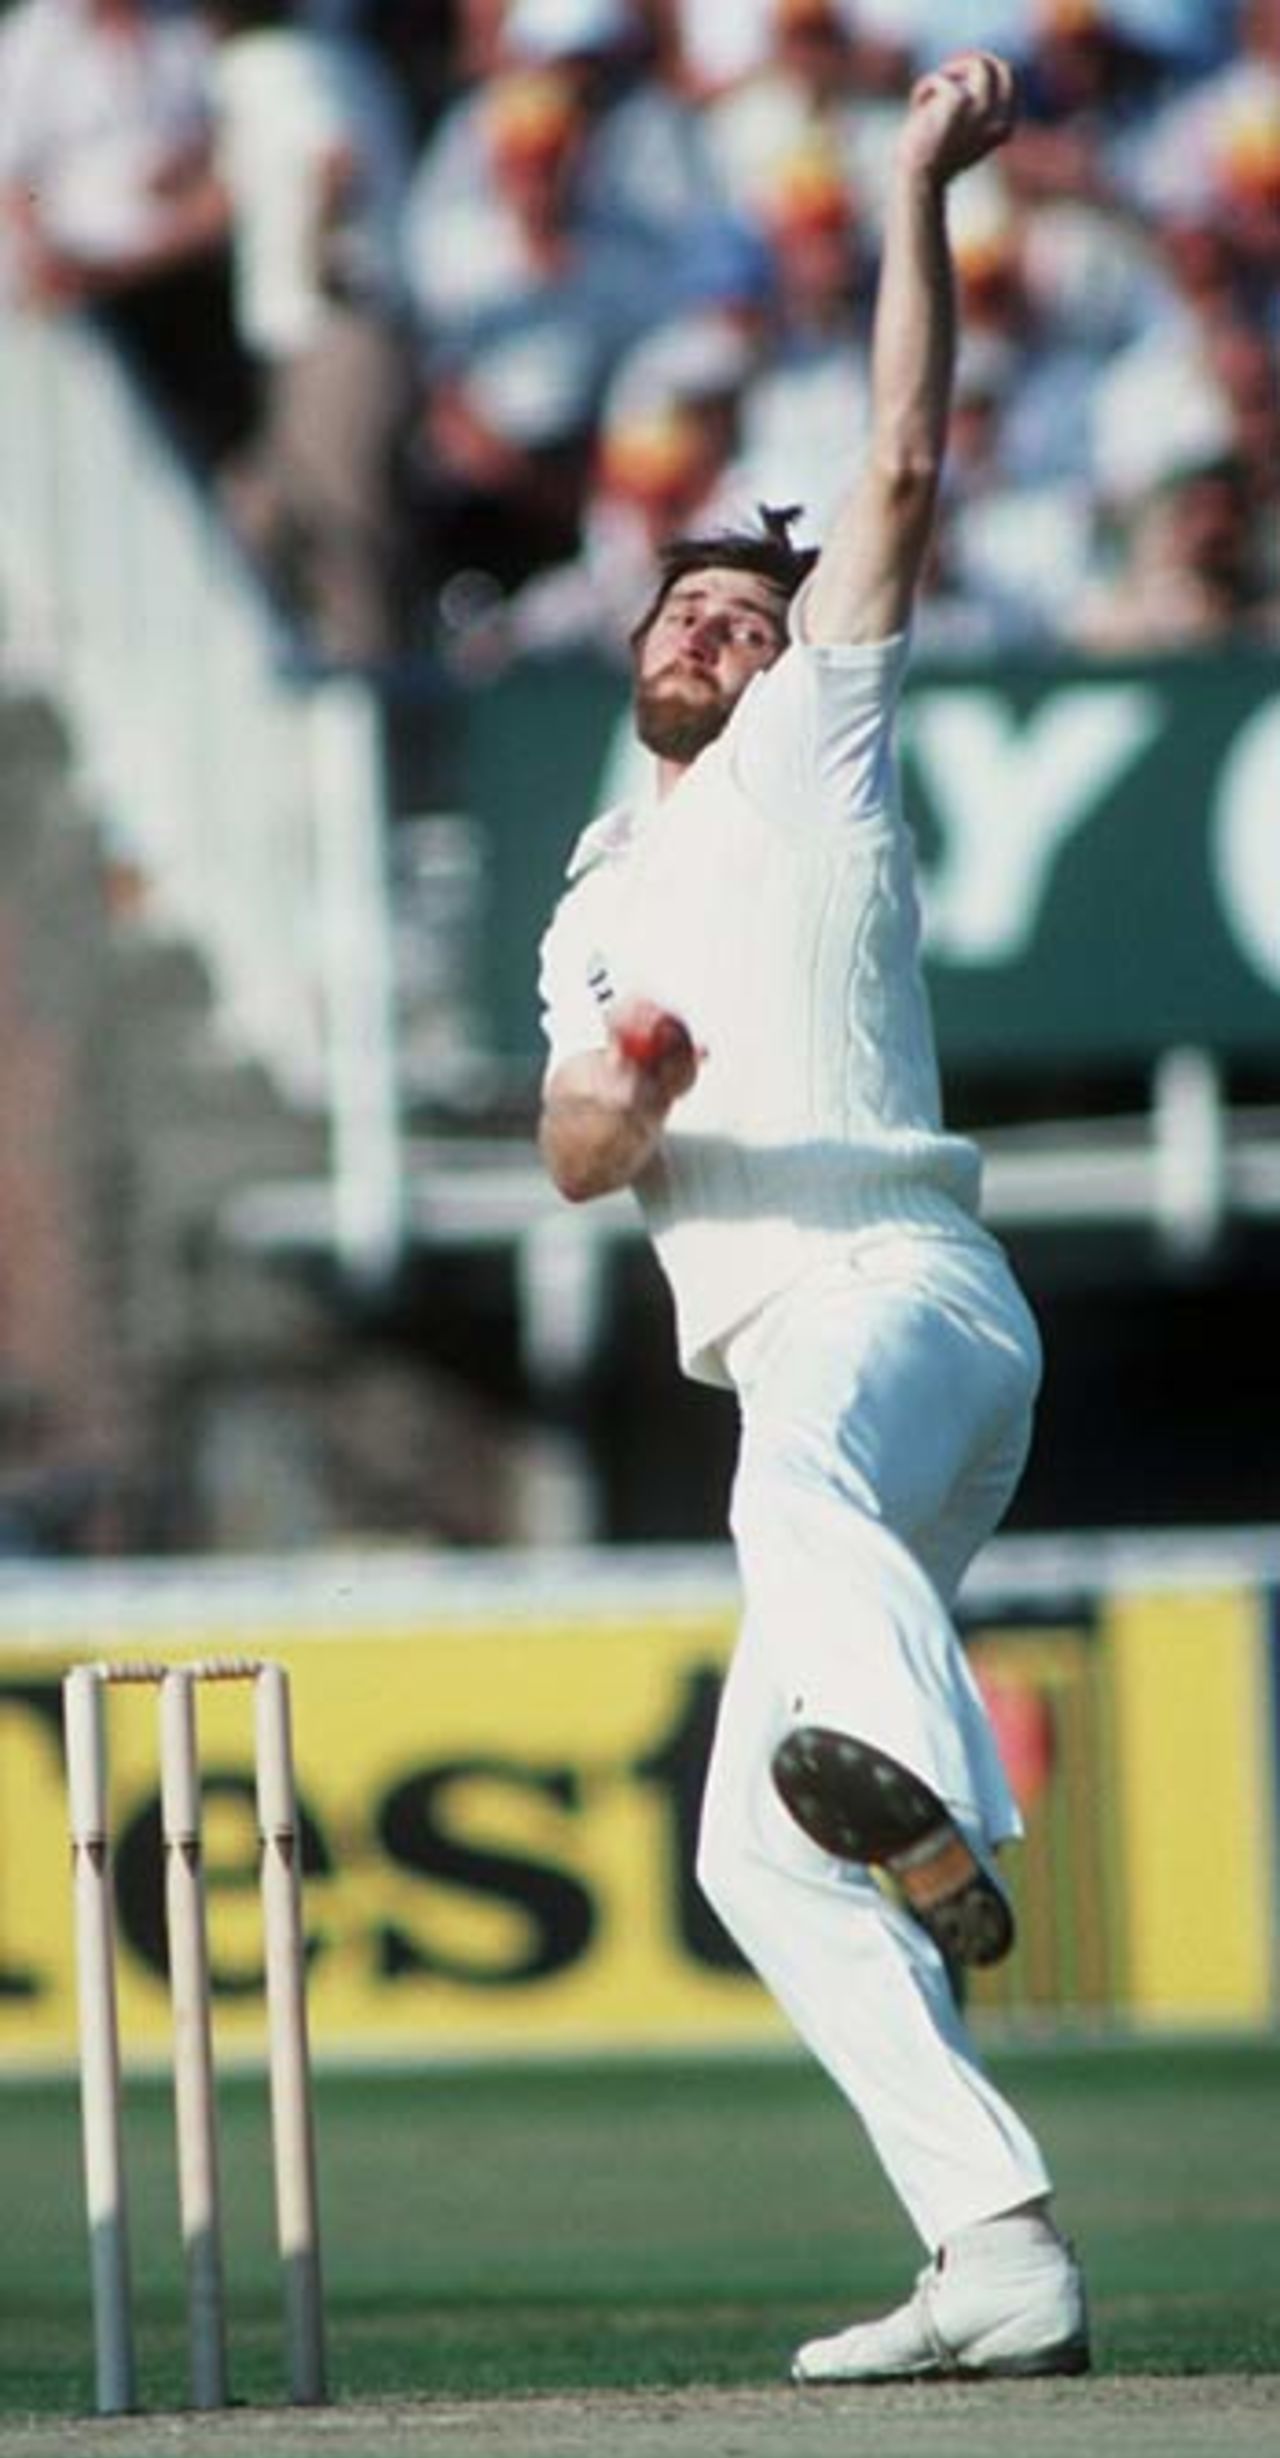 Chris Old bowling during the 1981 Headingley Test